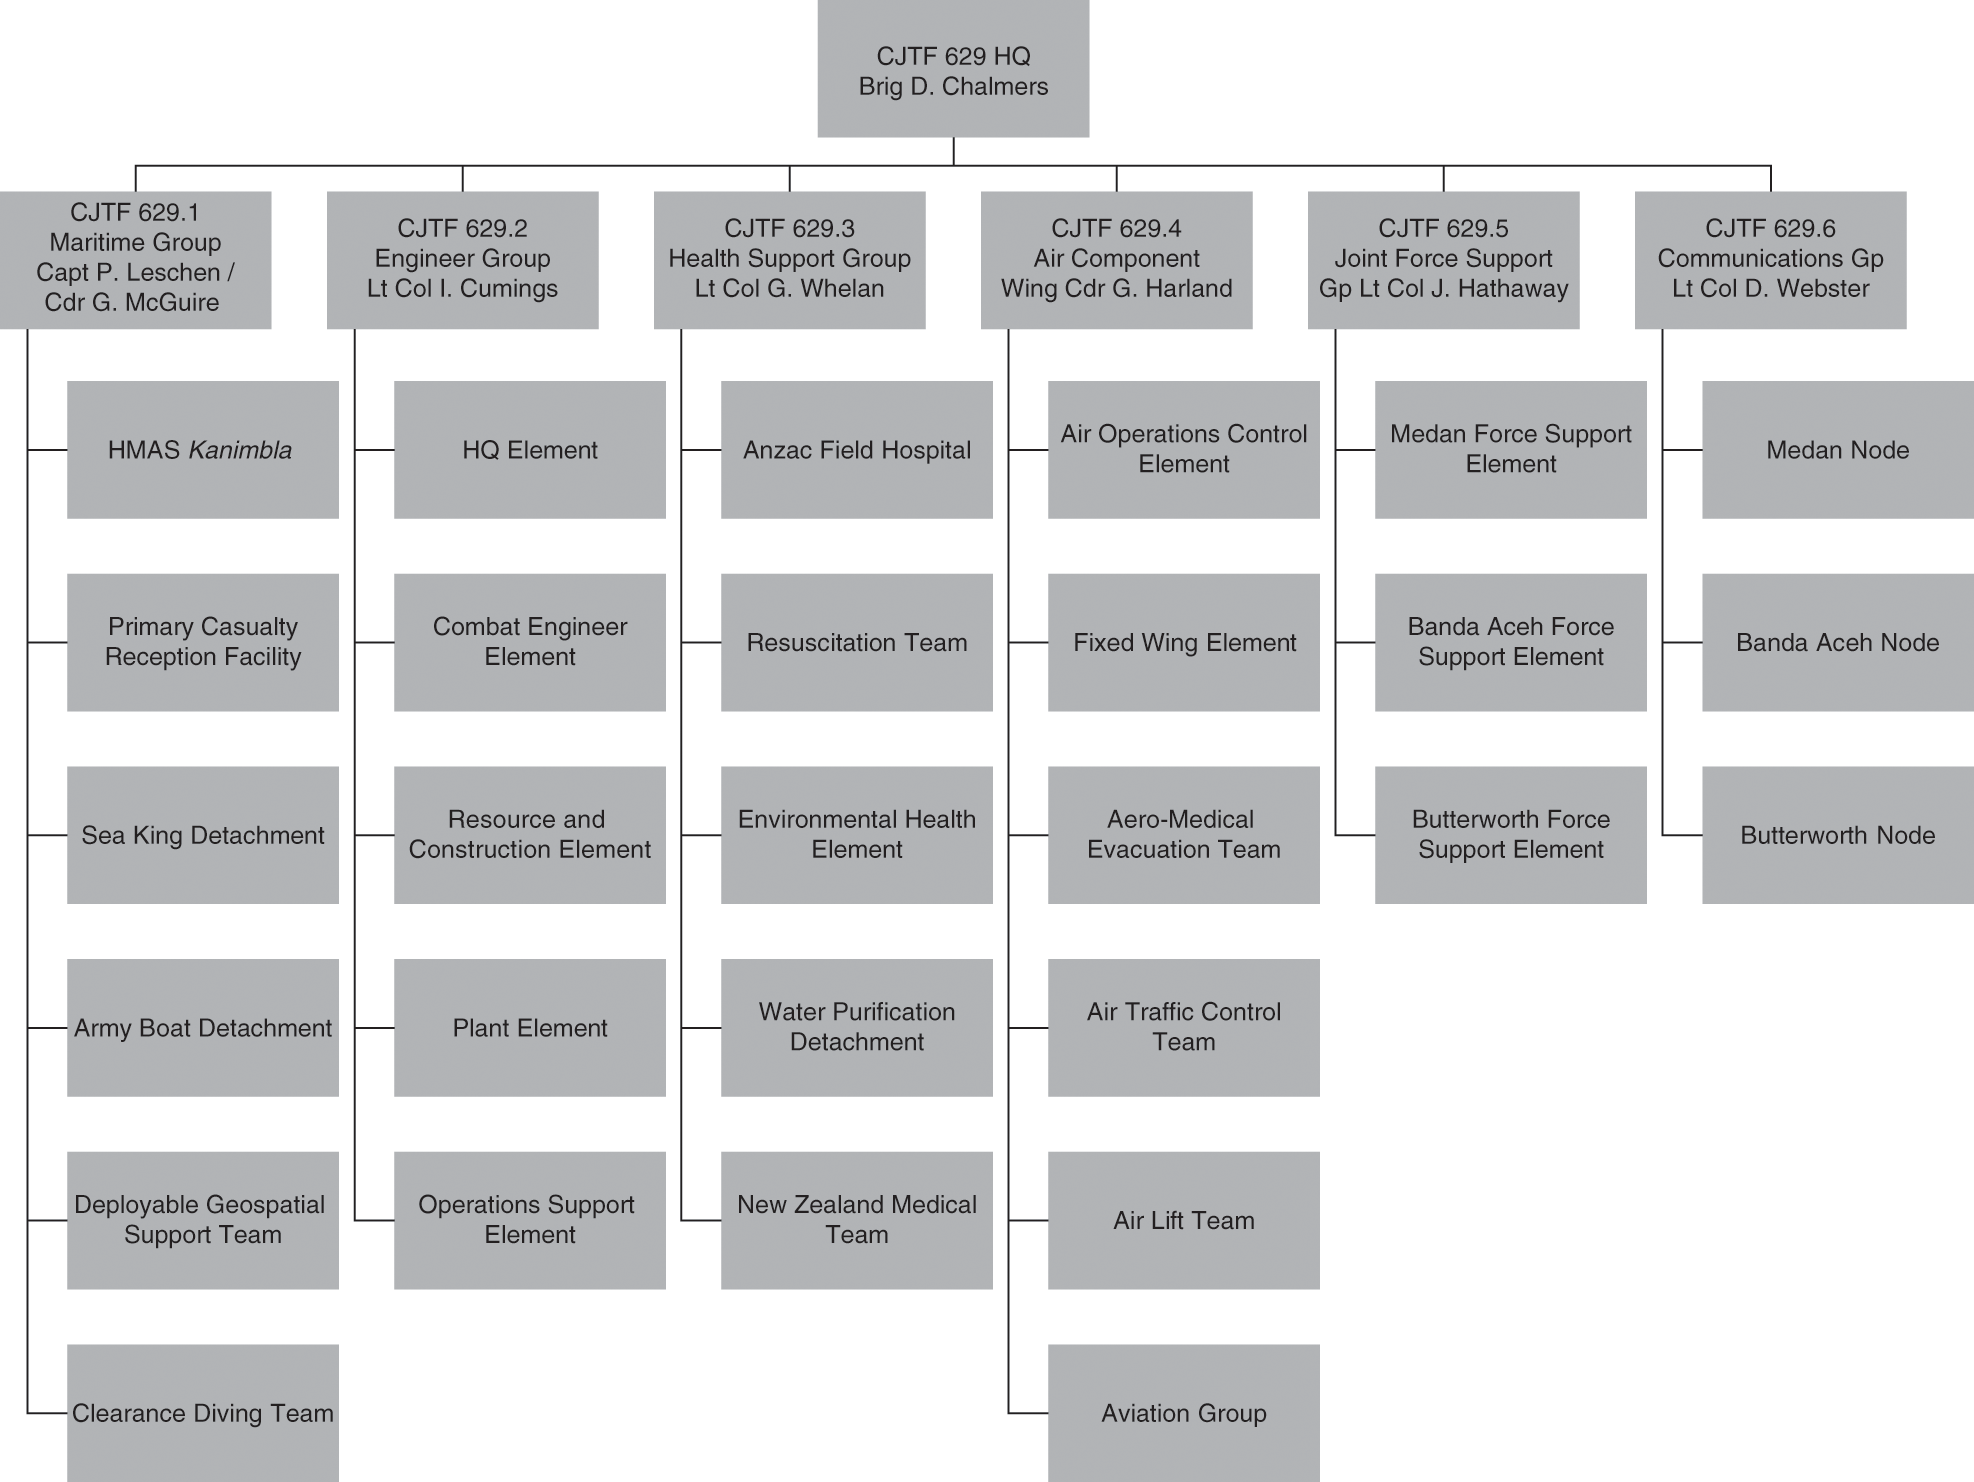 Joint Task Force Organization Charts